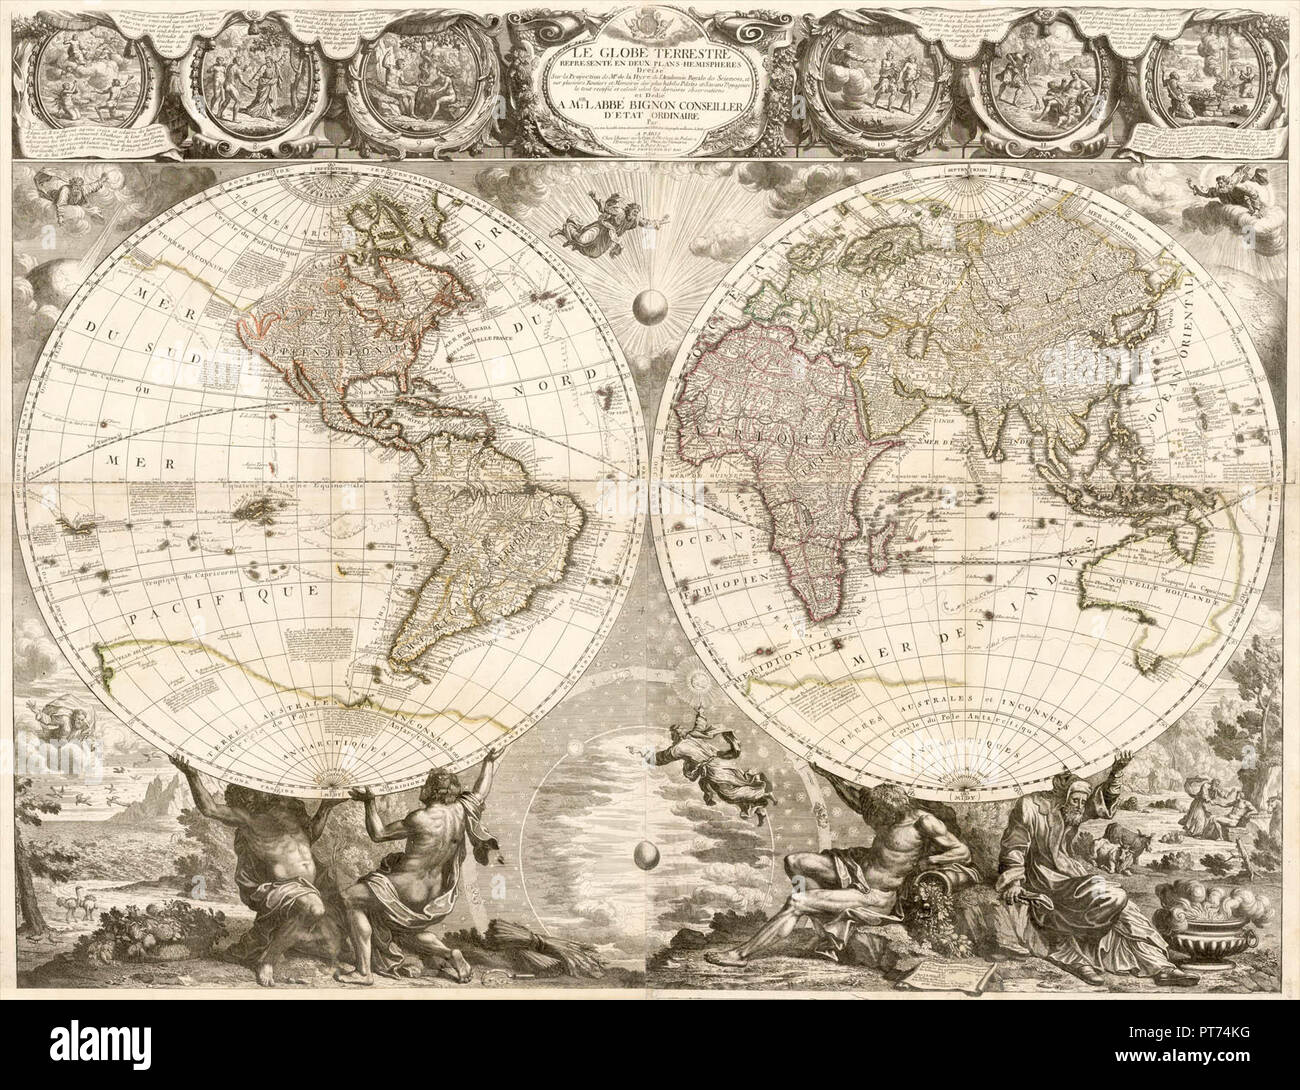 1700 Globe Map High Resolution Stock Photography and Images - Alamy